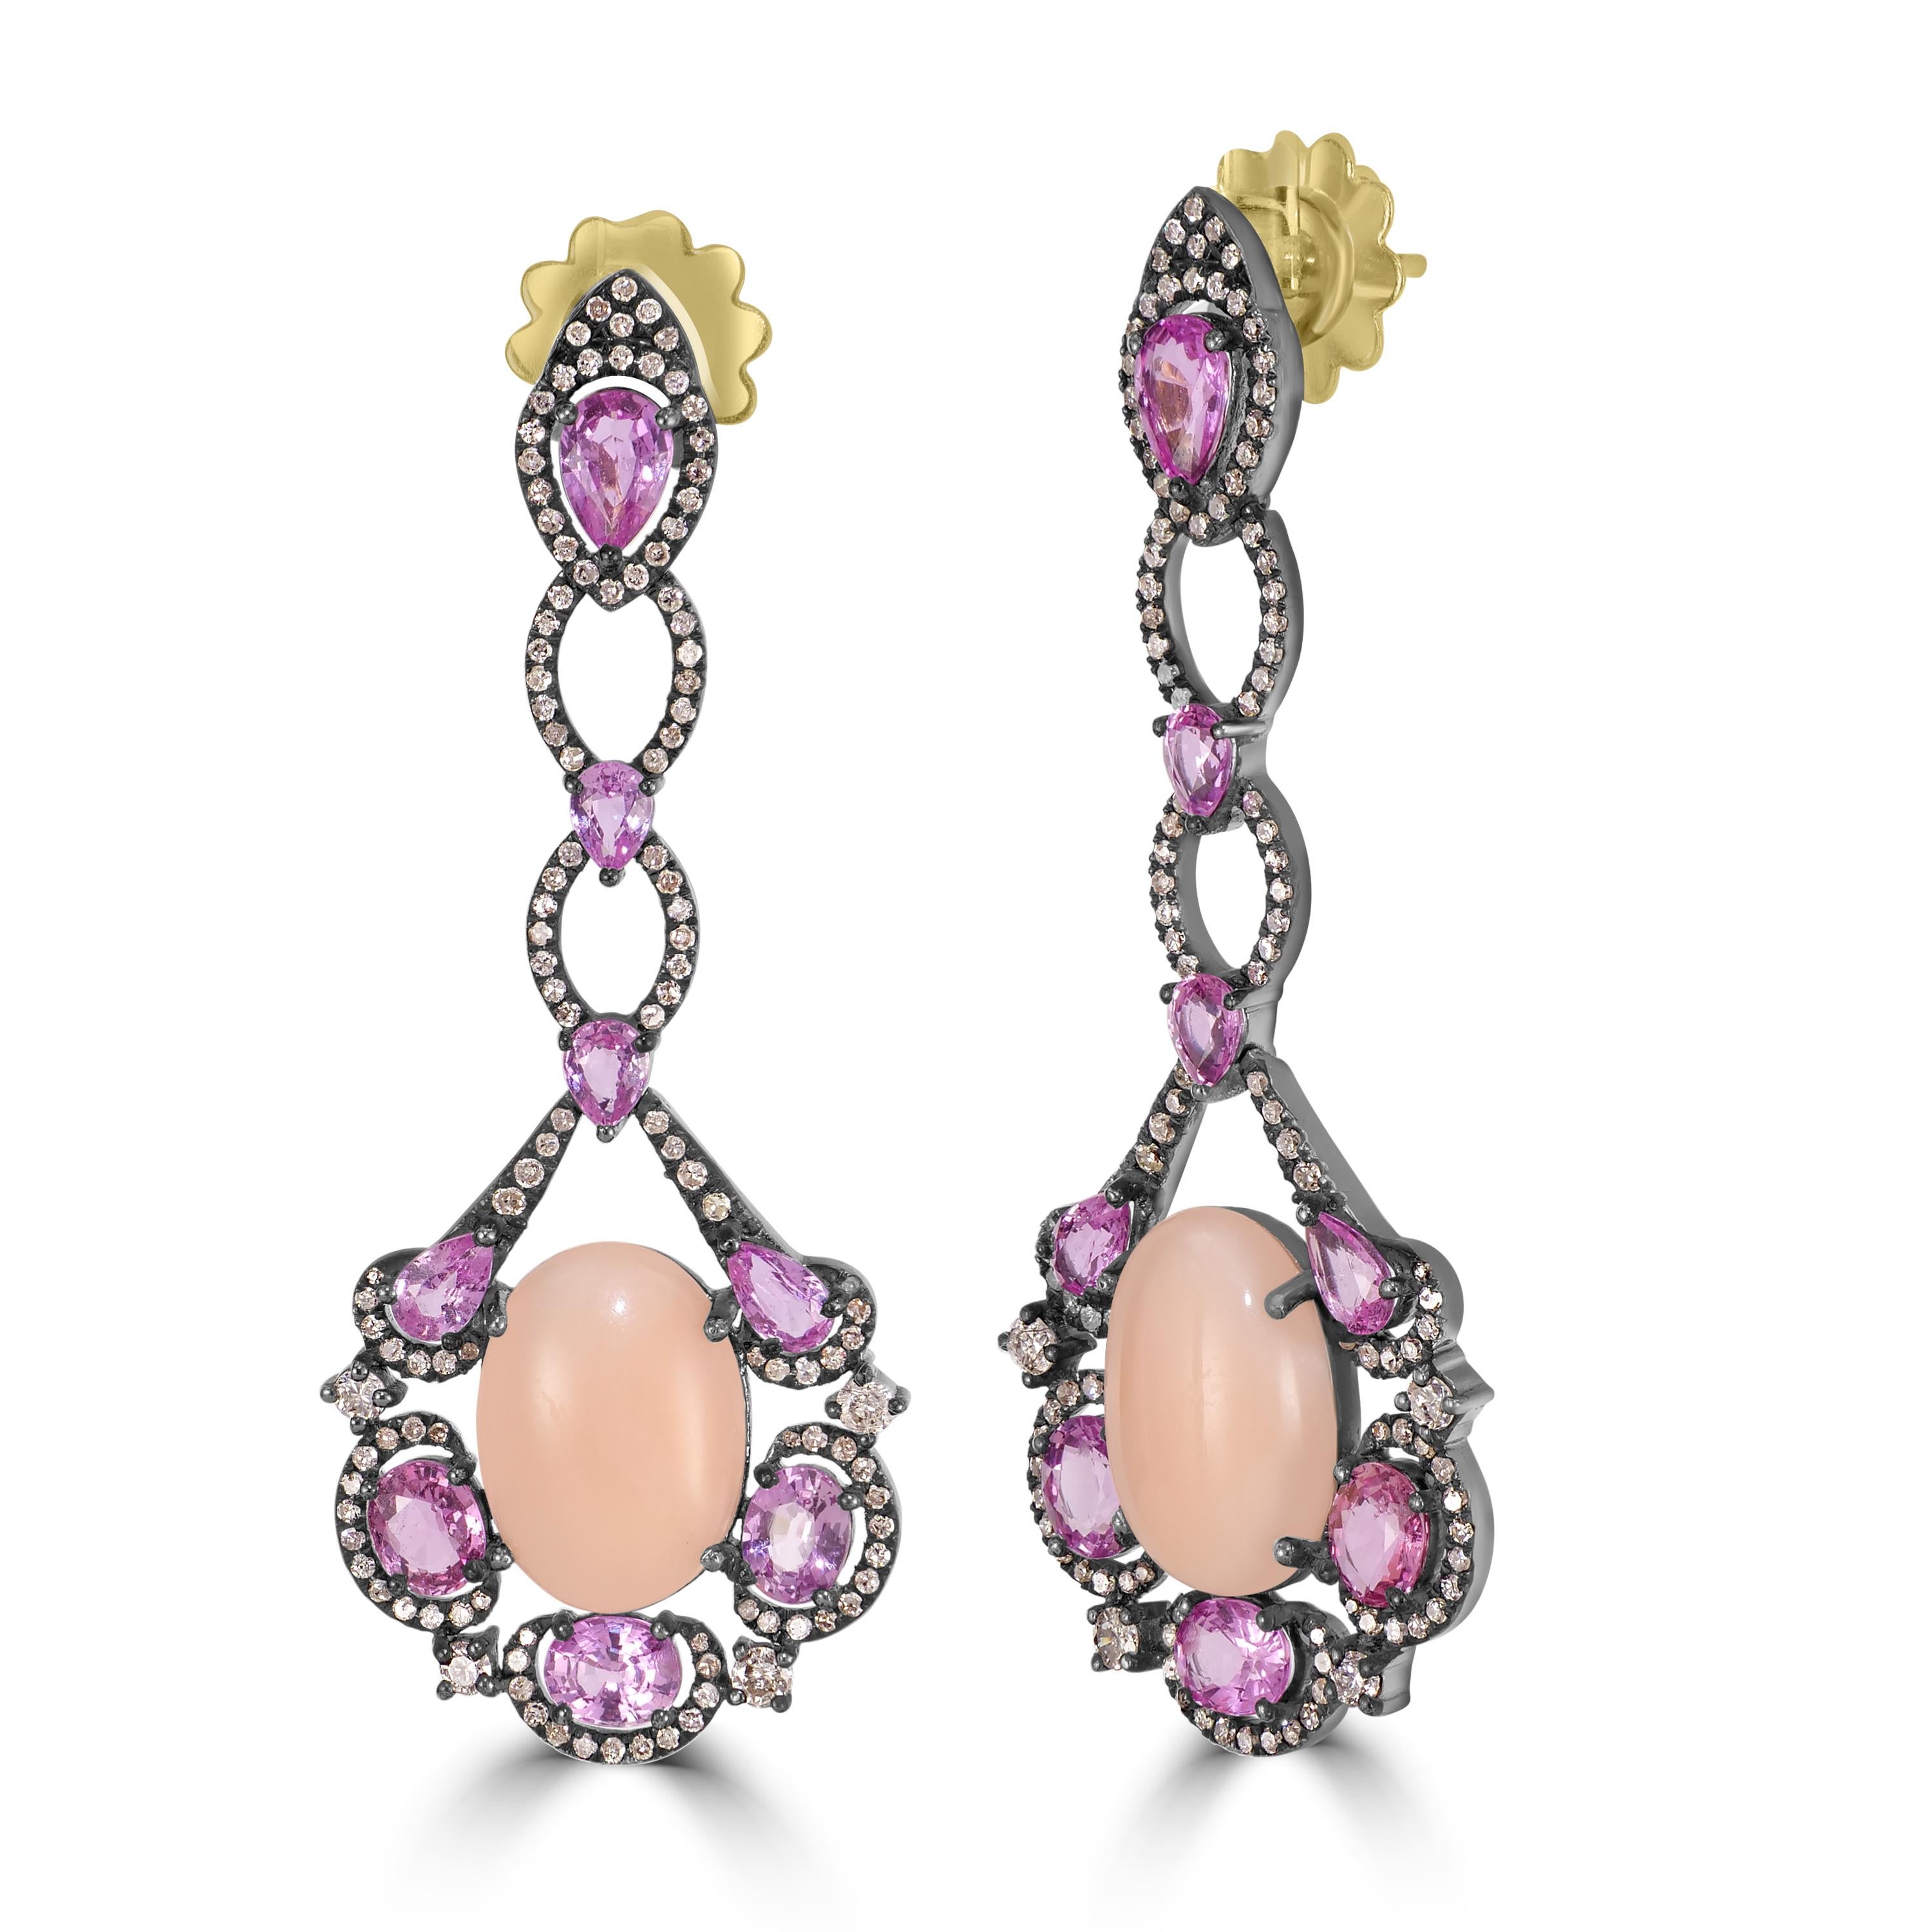 Introducing our Victorian 15.3 Cttw. Peach Coral, Pink Sapphire, and Diamond Dangle Earrings – a stunning blend of elegance and sophistication.

These exquisite dangle earrings feature a captivating design, with a luscious peach coral center